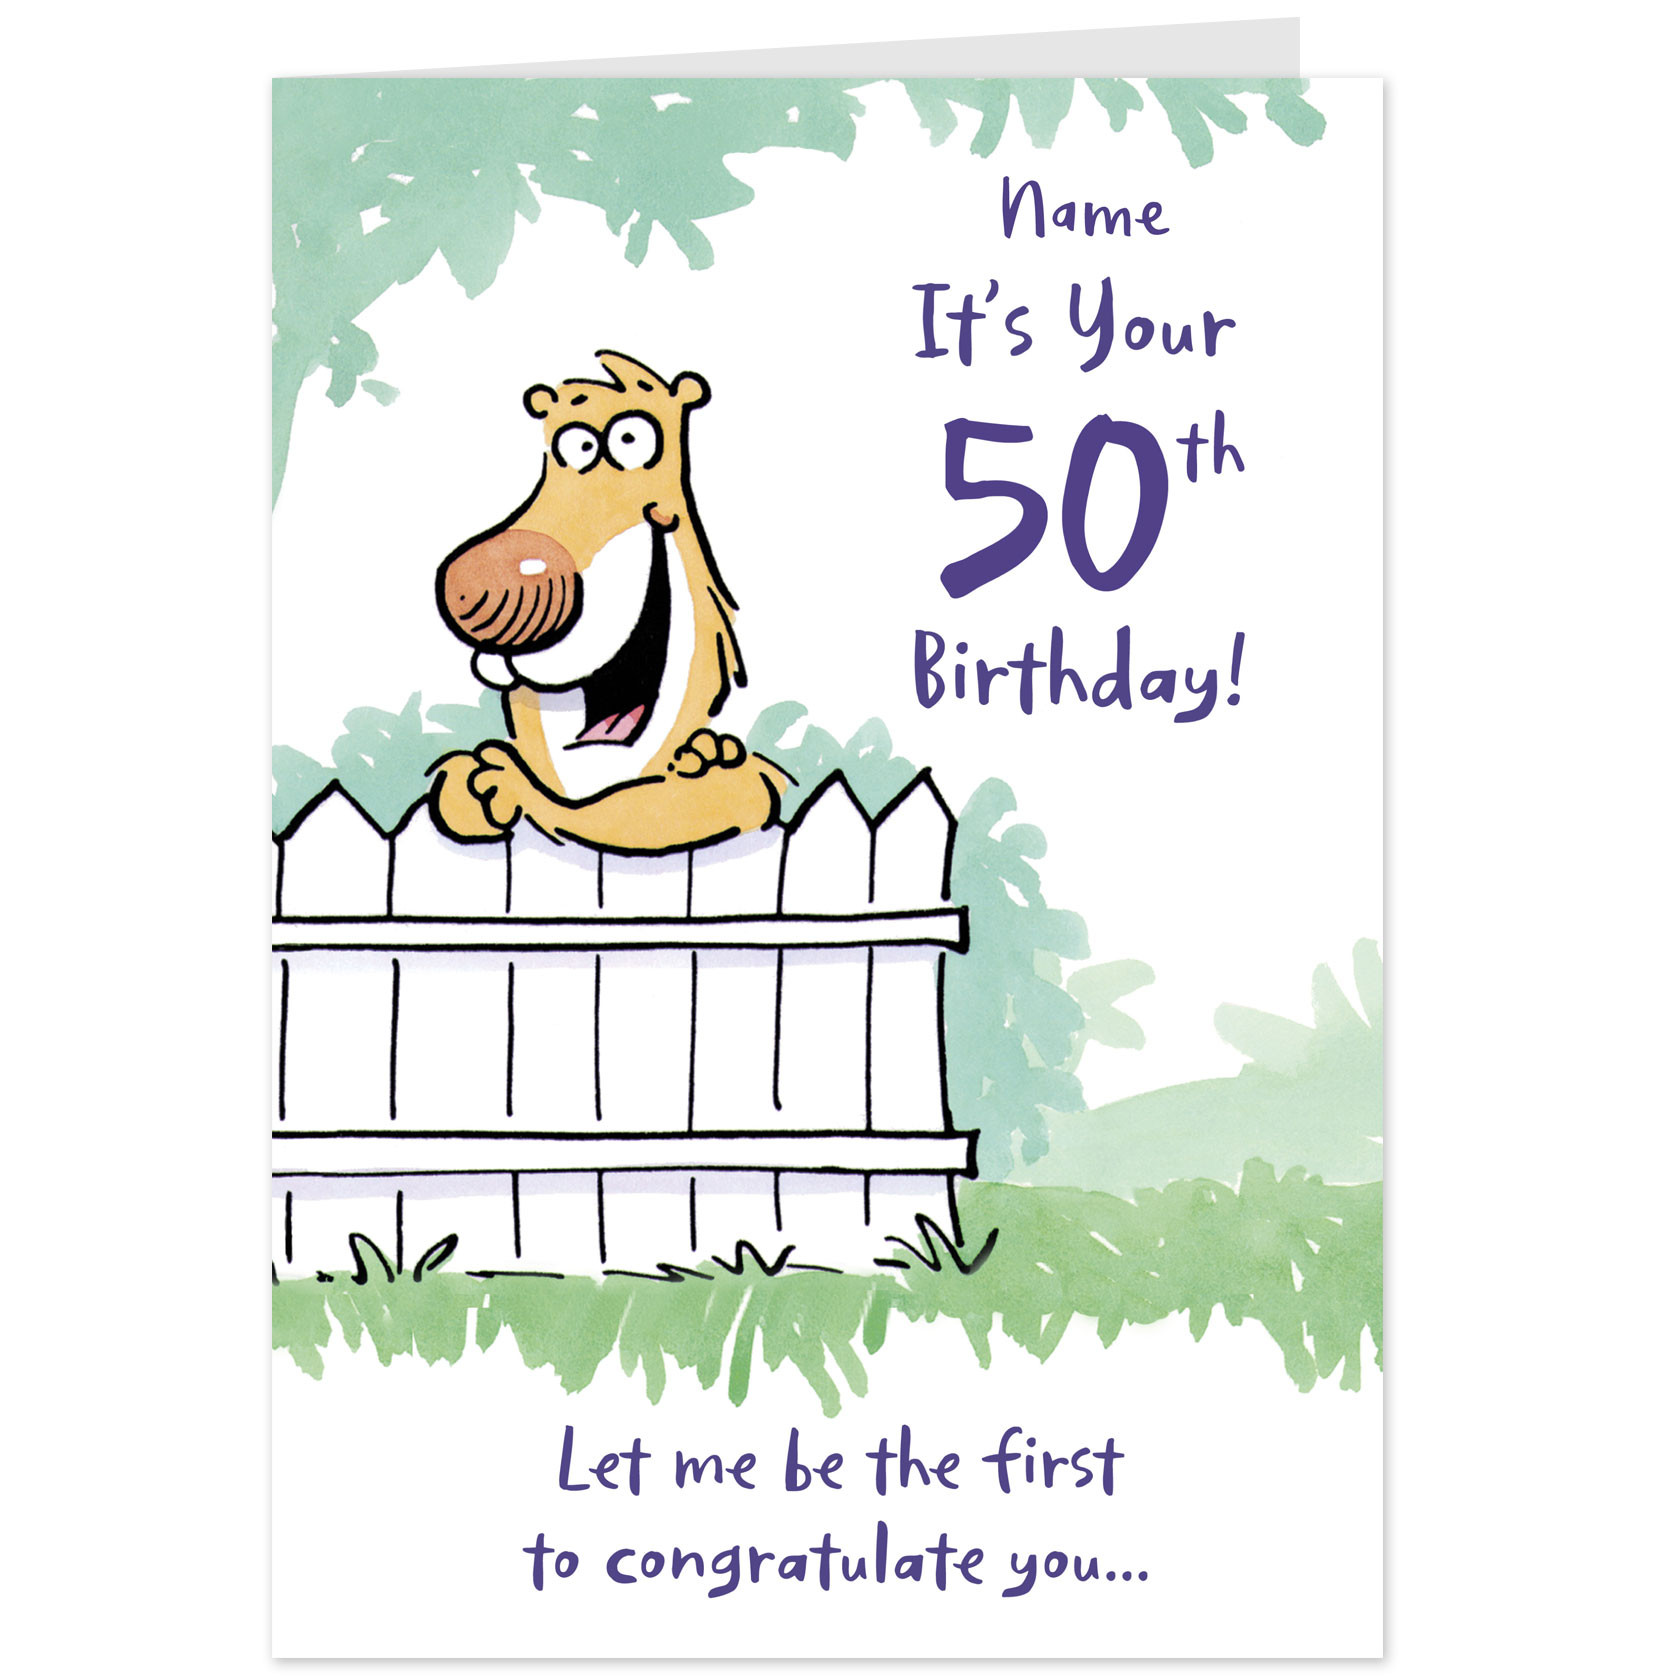 Quote For Birthday Card
 Greeting Card Funny Quotes QuotesGram